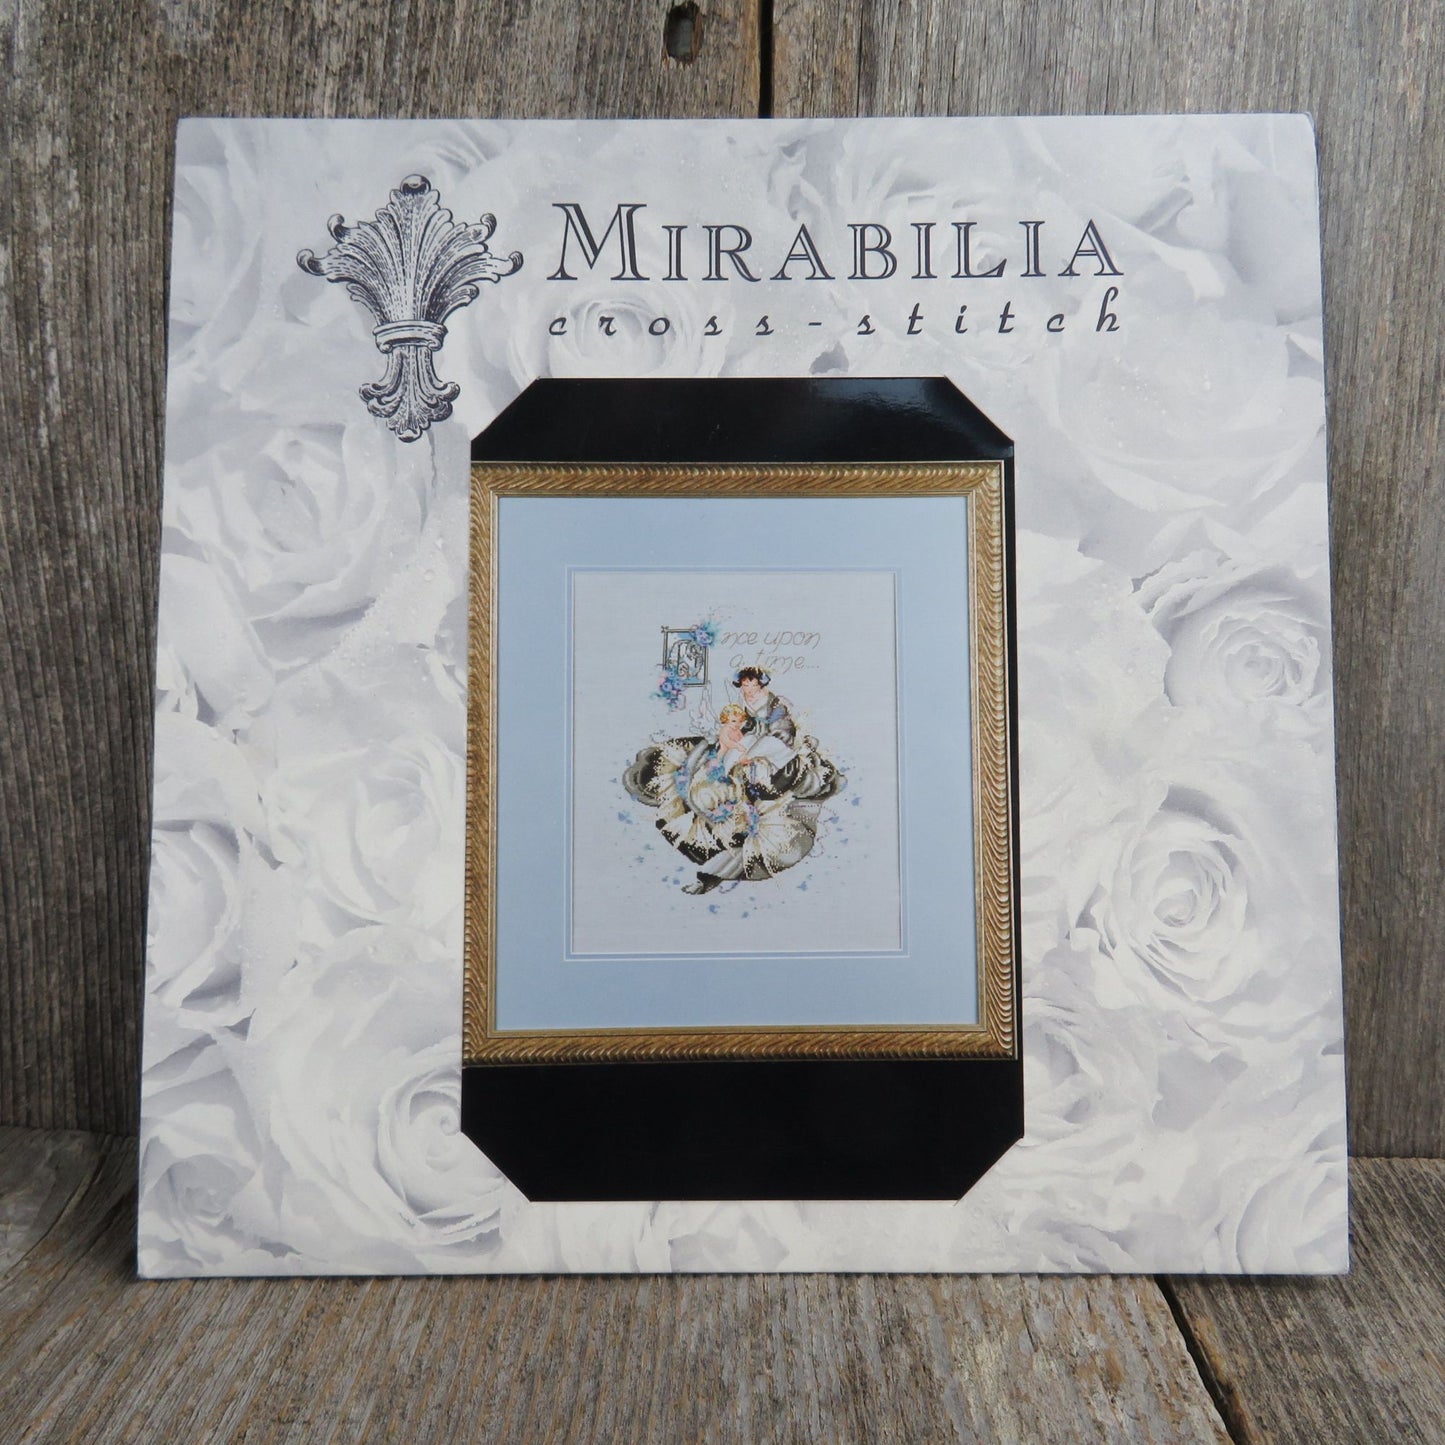 Mirabilia Counted Cross Stitch Pattern Fairy Tales MD-20 Nora Corbett 1996 Mother and Child